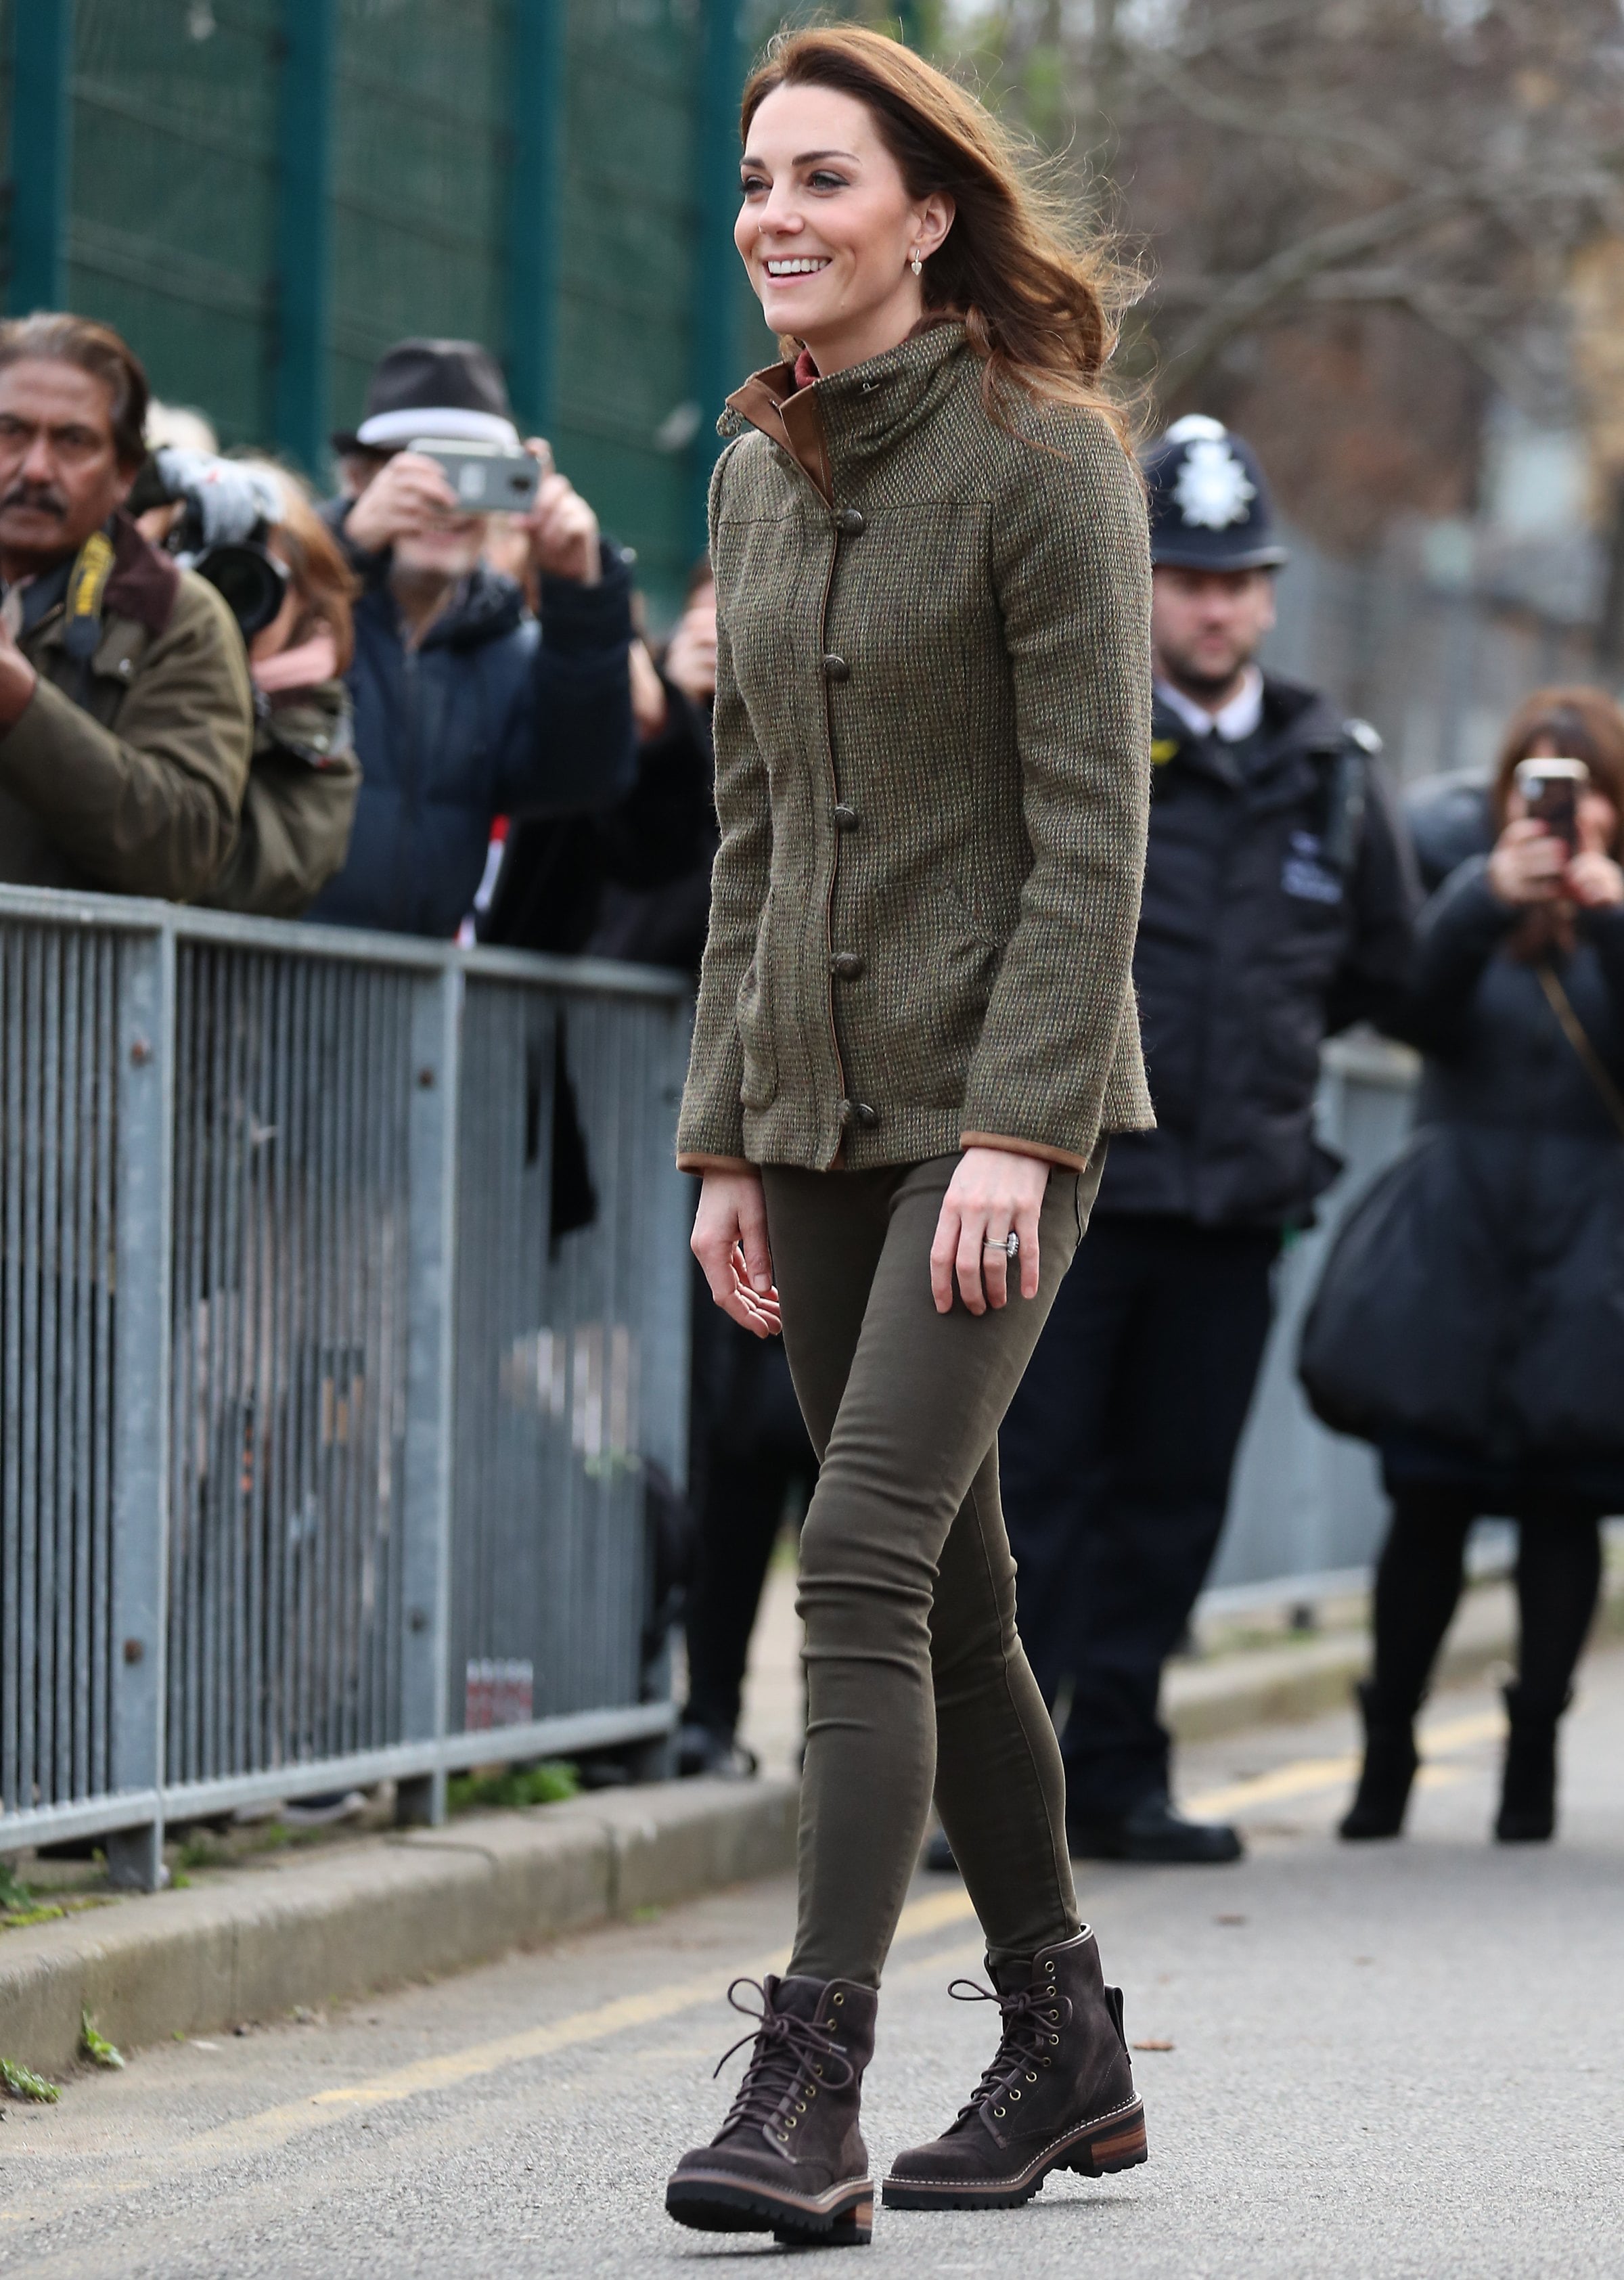 Kate Middleton's 15 Pairs of Stylish Knee High Boots - Dress Like